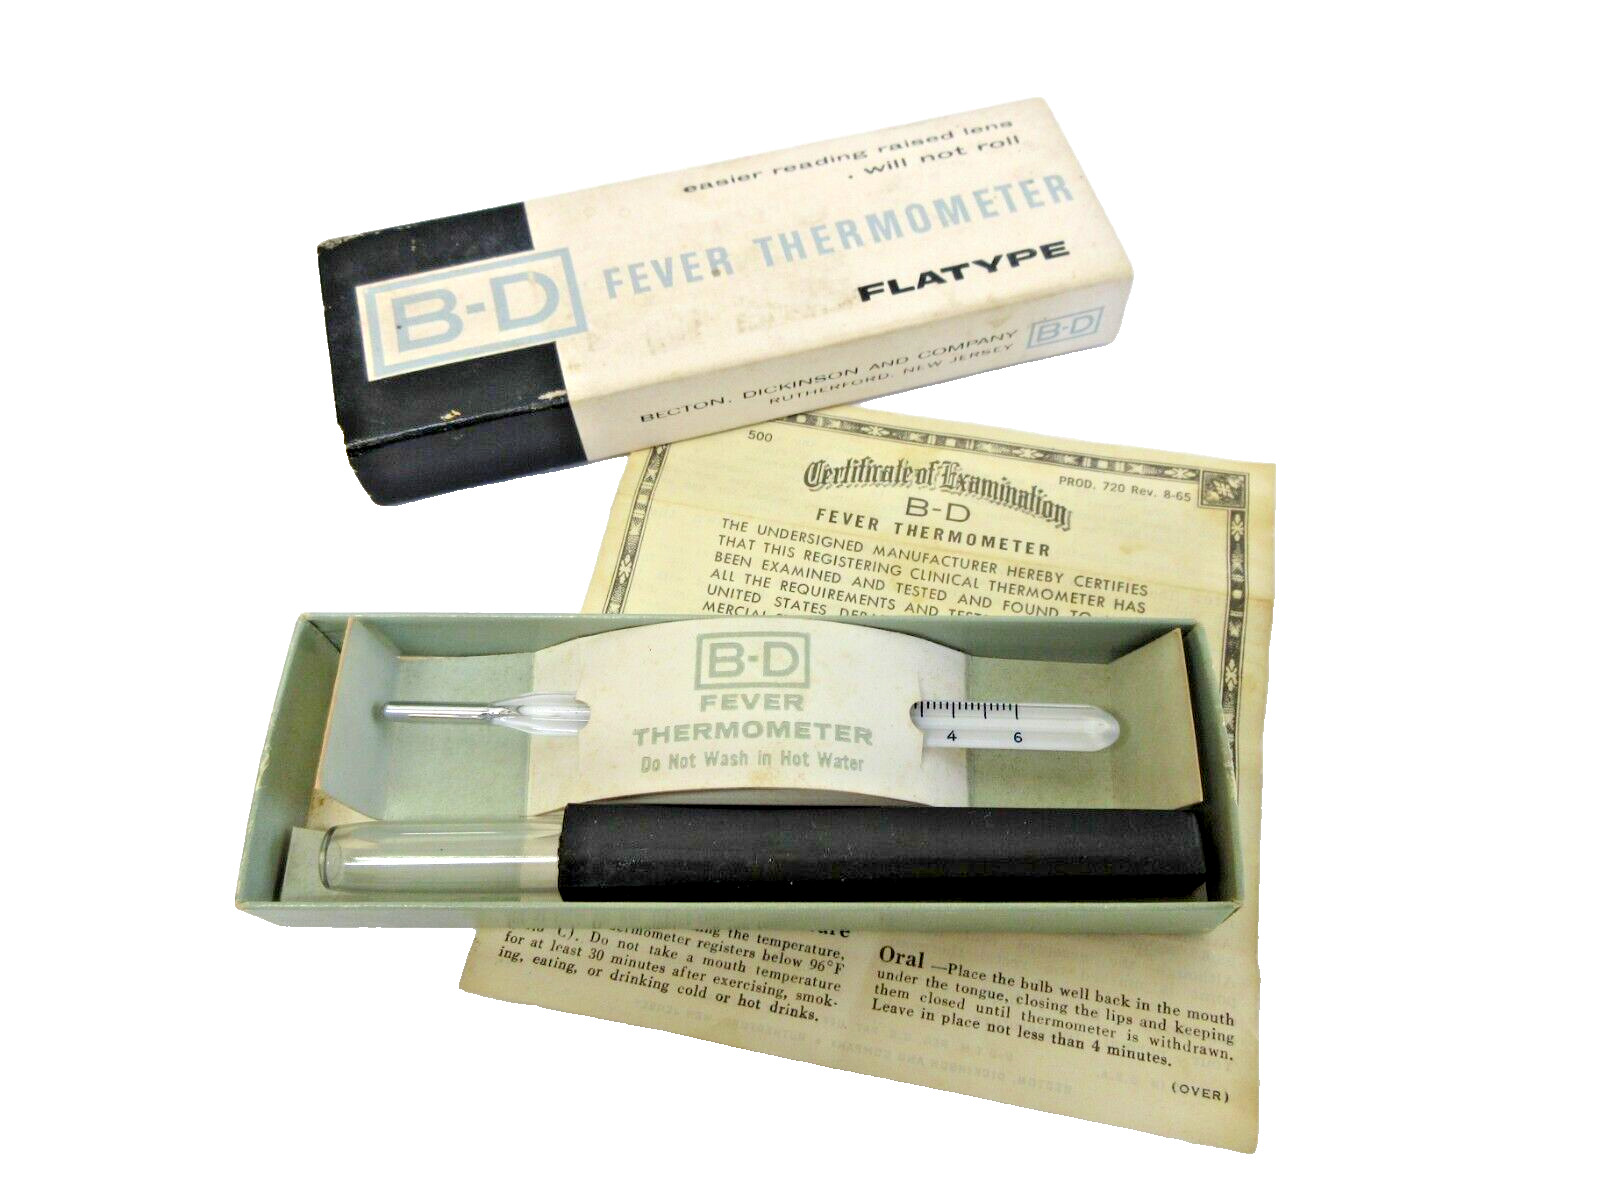 Vtg B-D ORAL (or RECTAL) FEVER THERMOMETER FLATYPE K25W w Box & Instructions